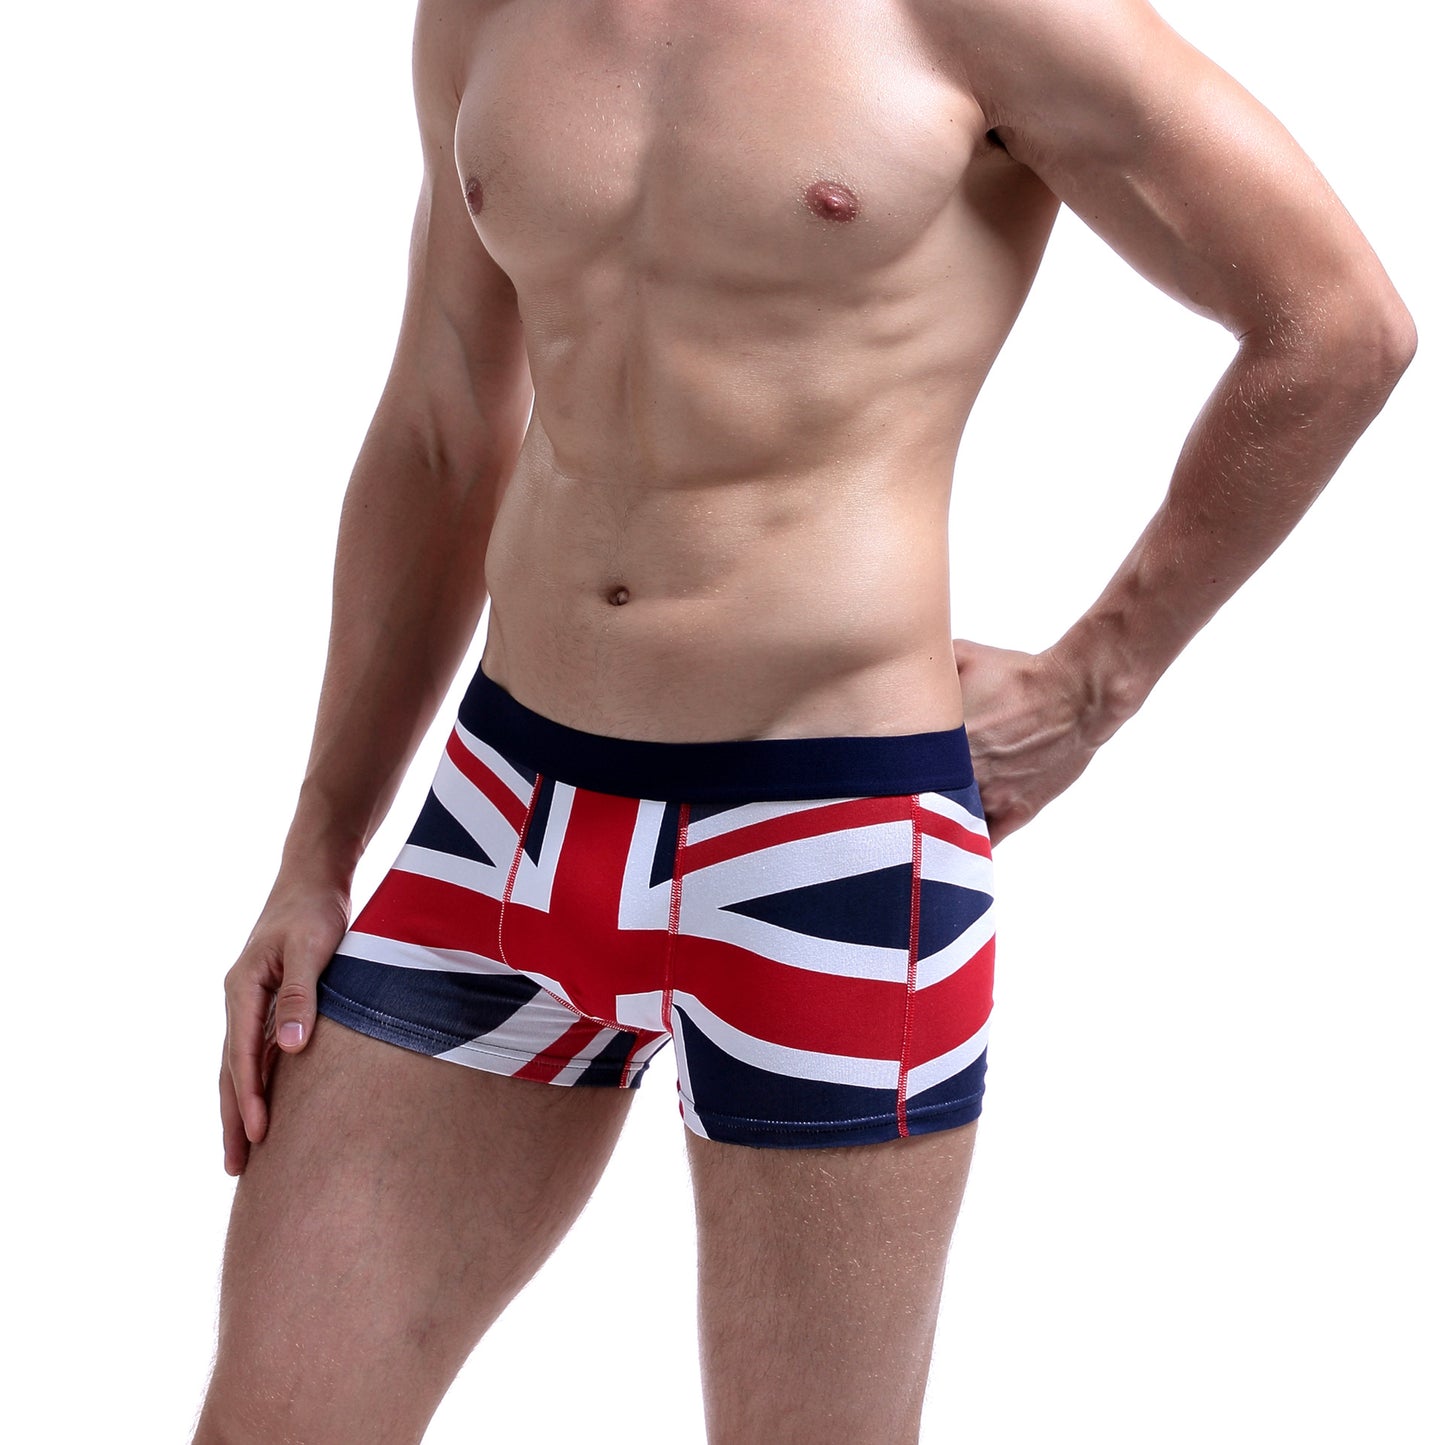 Men's Boxer Briefs-Hip Lifting for Comfortable and Stylish Underwear